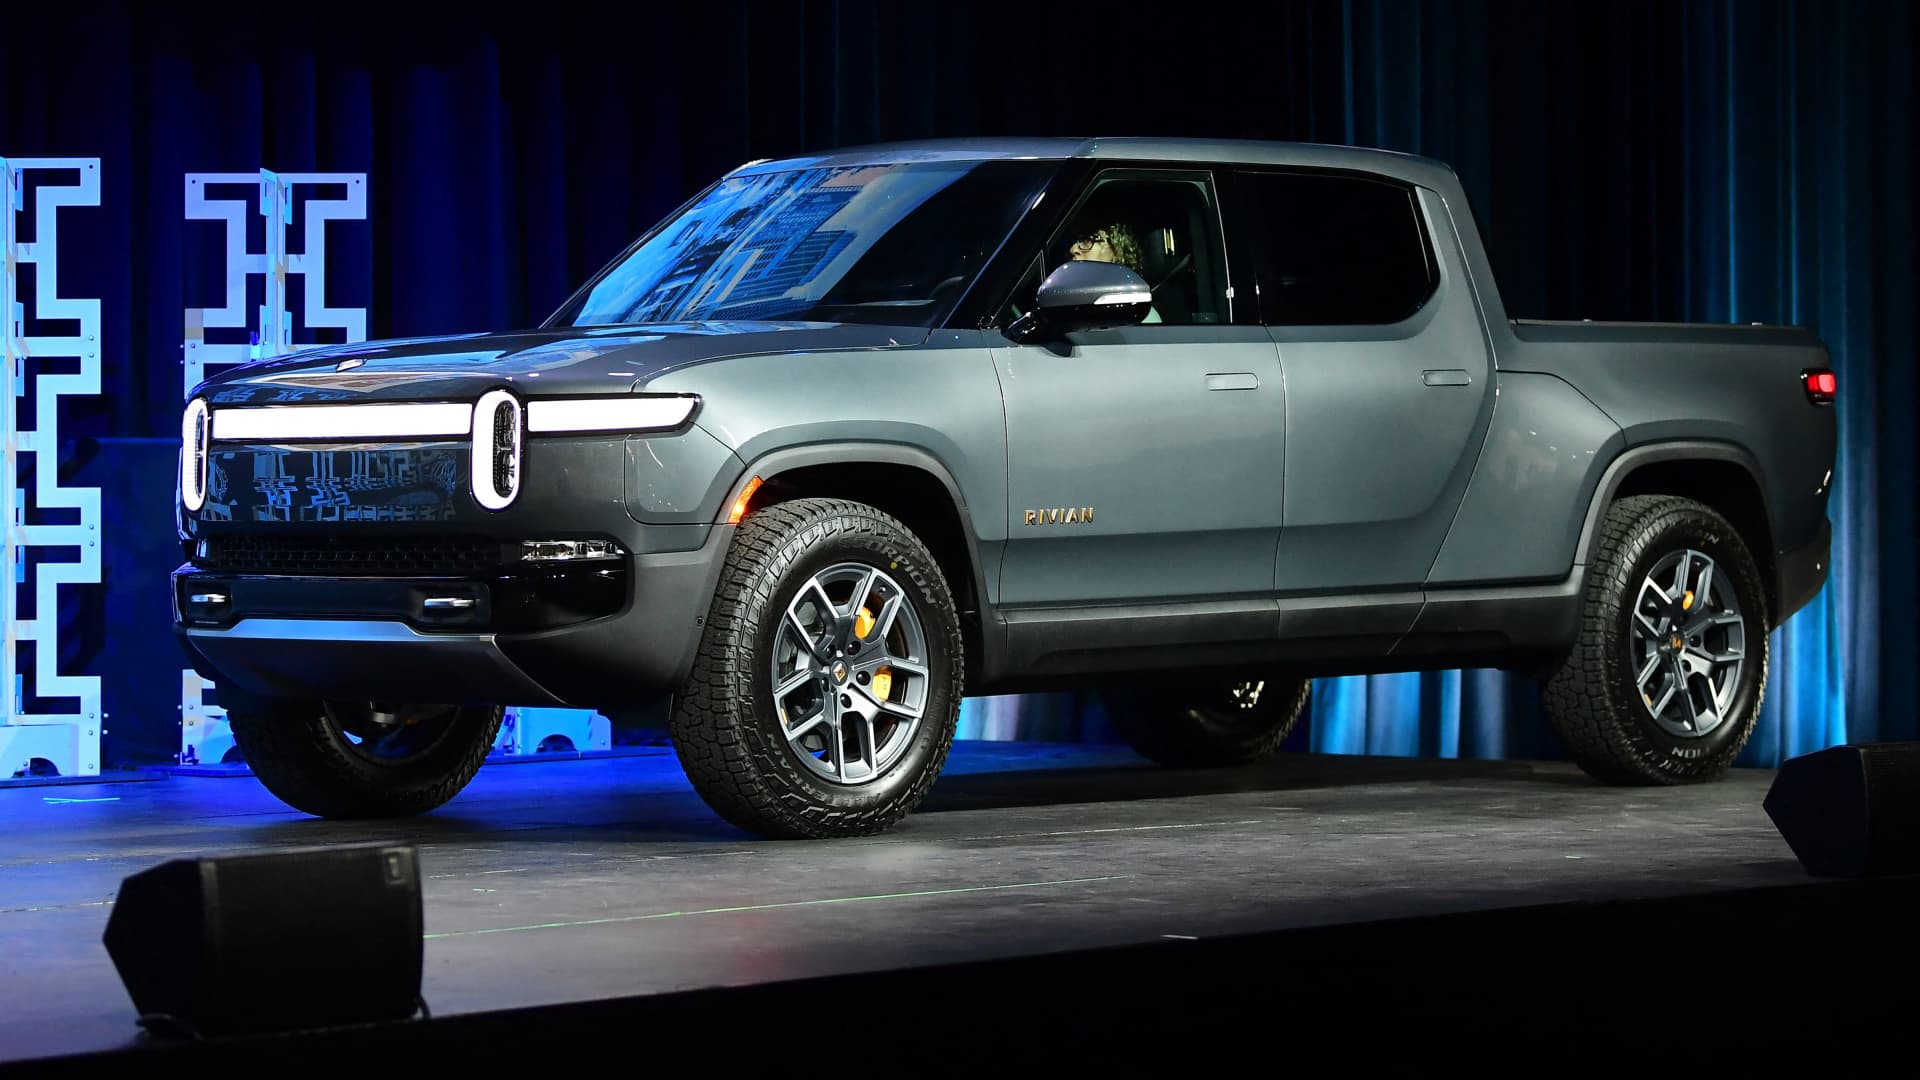 The Rivian R1T on stage as a 2022 Truck of the Year Finalist at the LA Auto Show in Los Angeles, California on November 17, 2021.